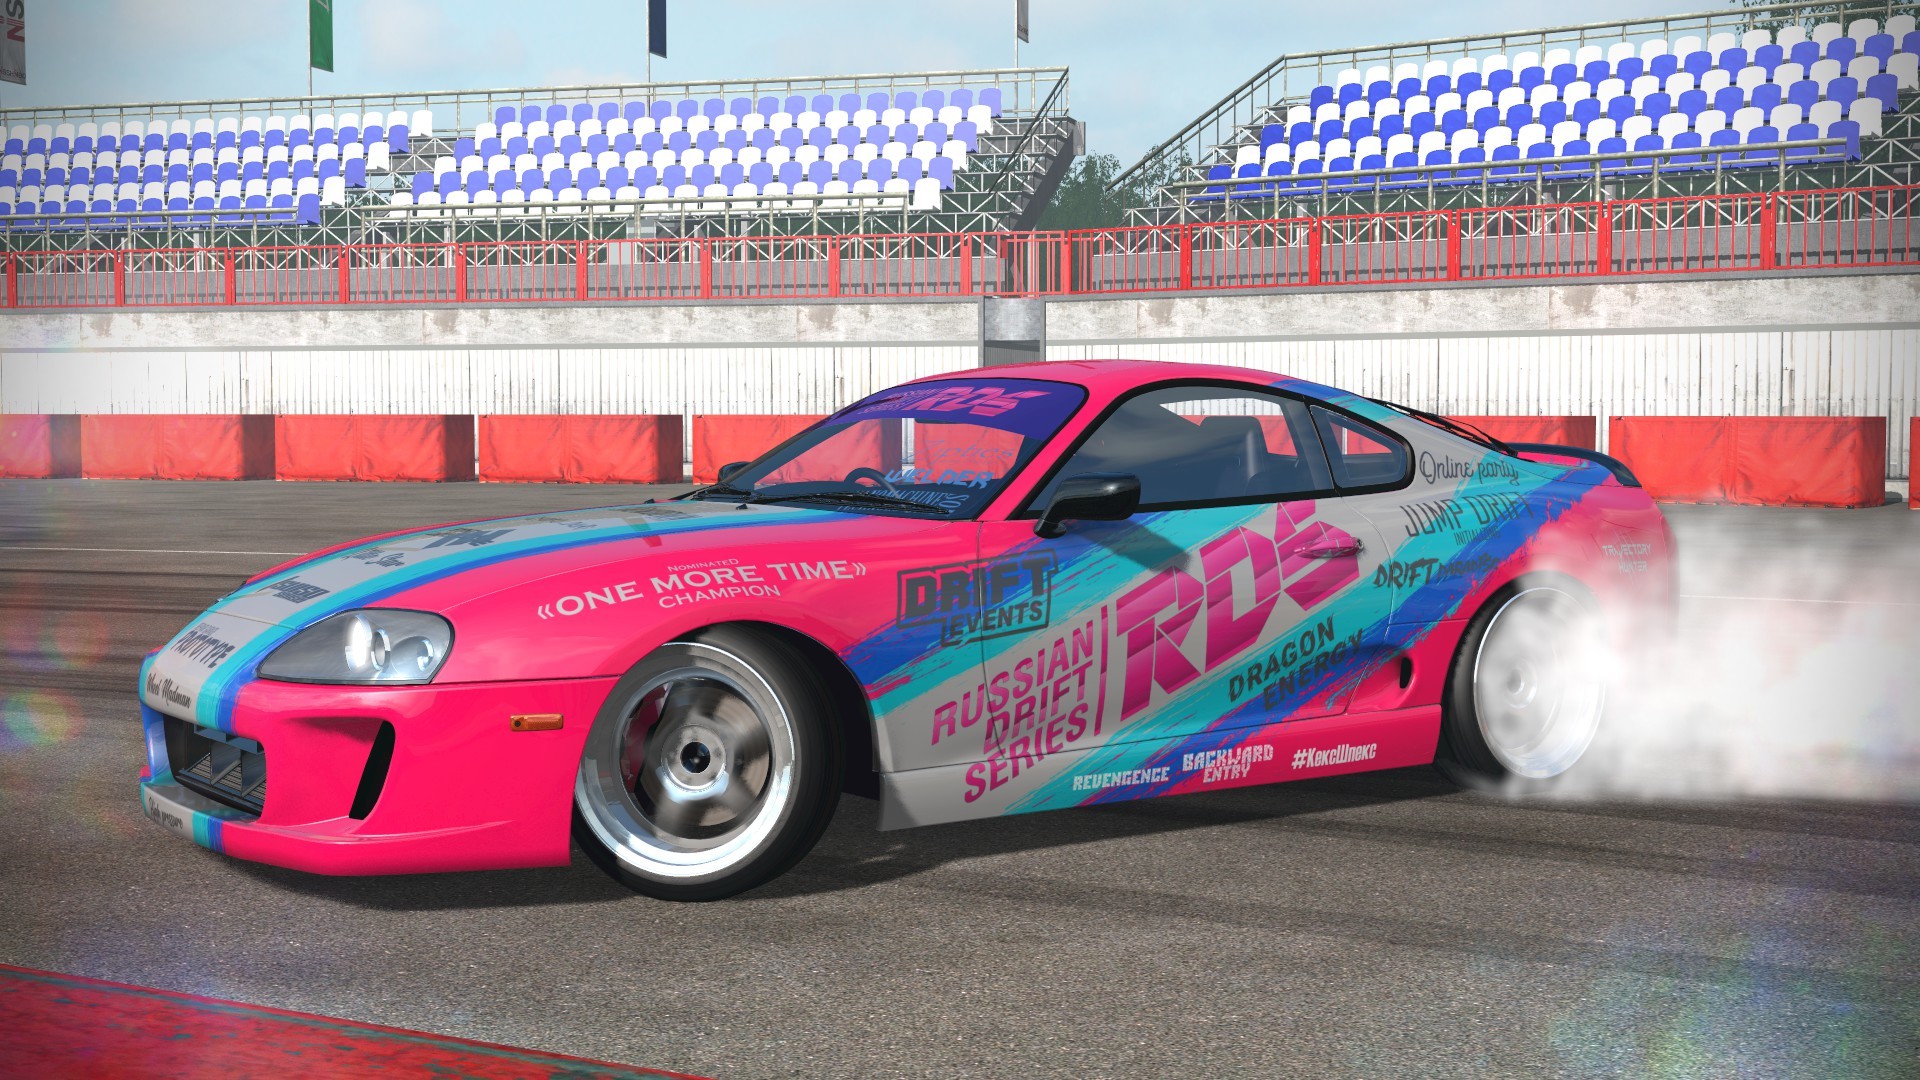 RDS - The Official Drift Videogame (PC)